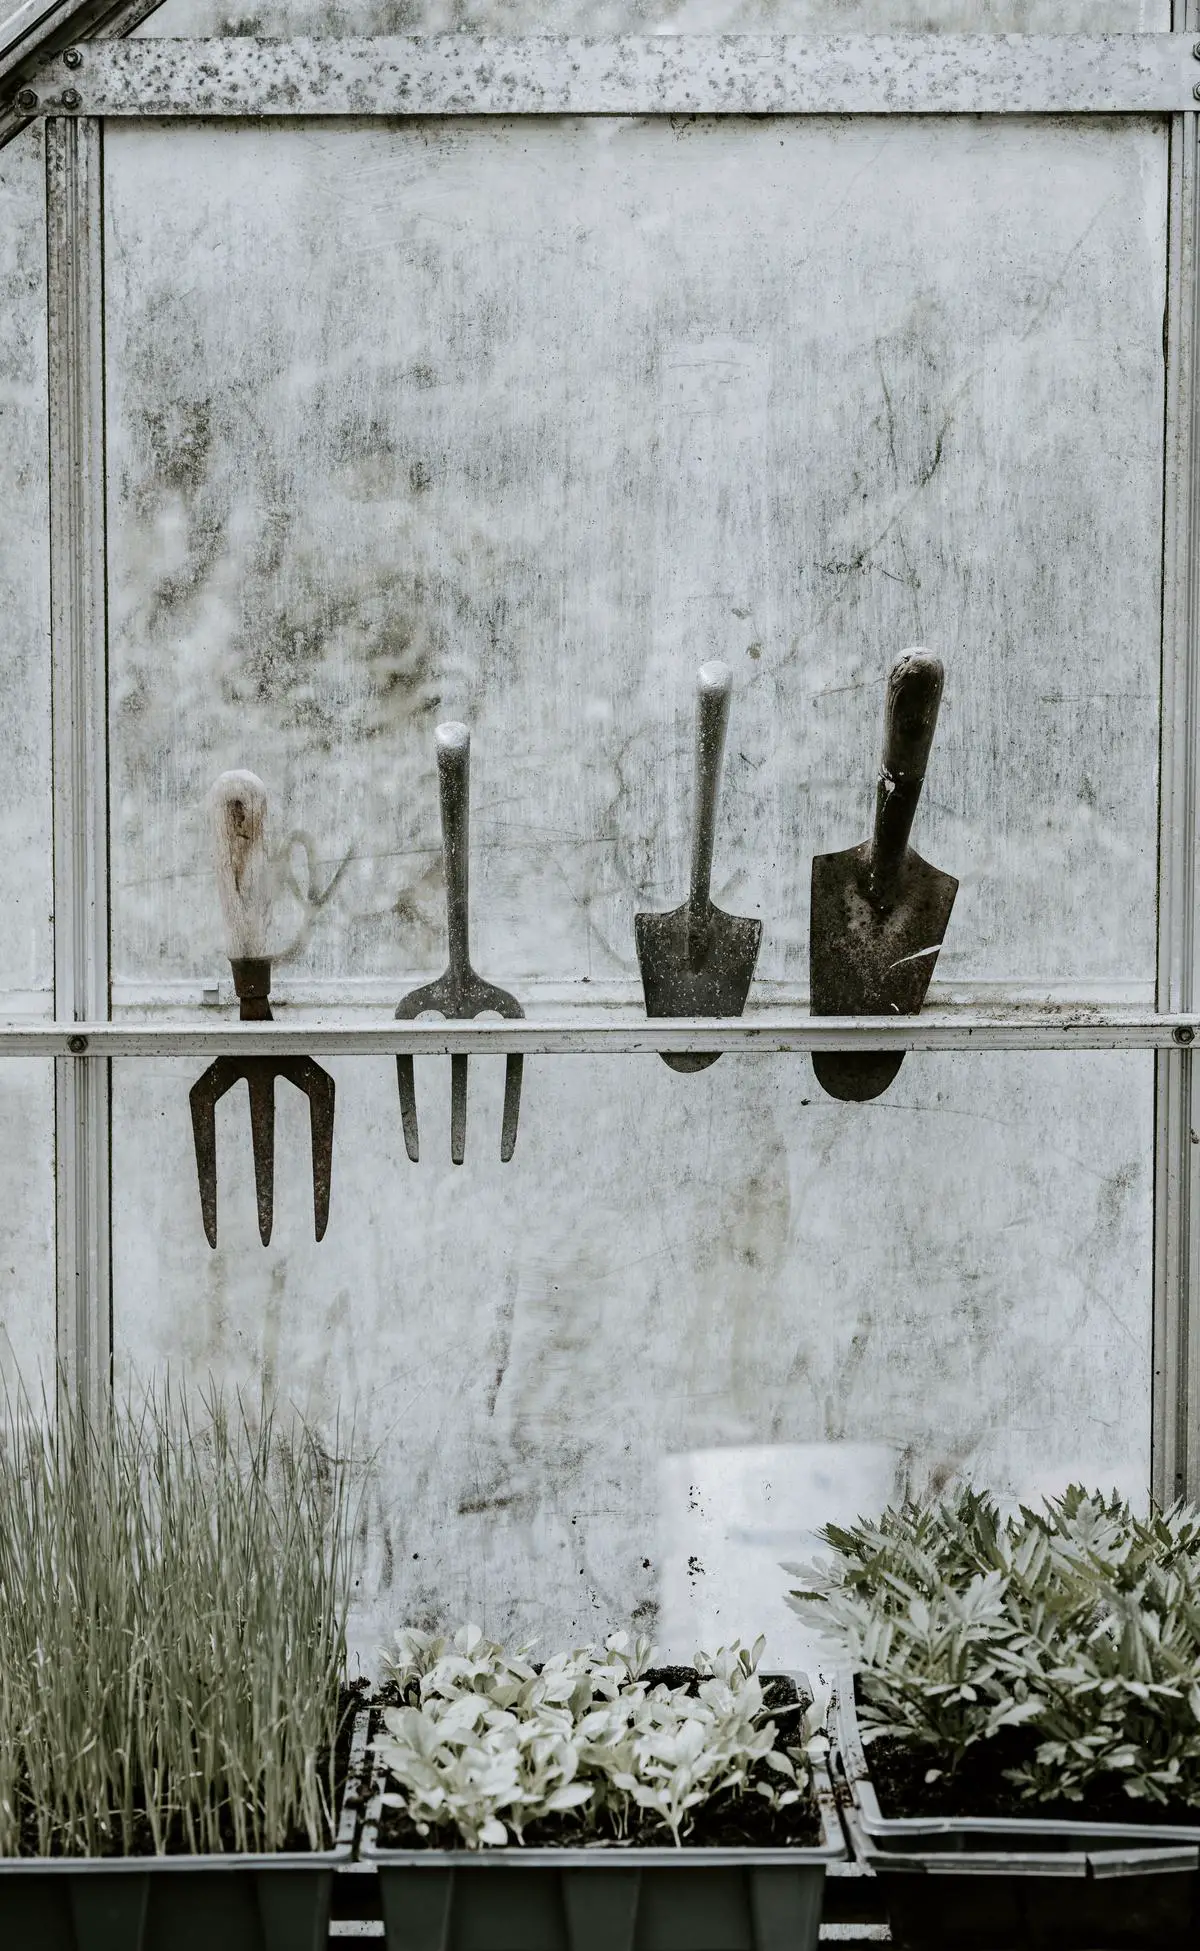 Image depicting a variety of IKEA gardening tools, including pruners, loppers, trowels, and a watering can.